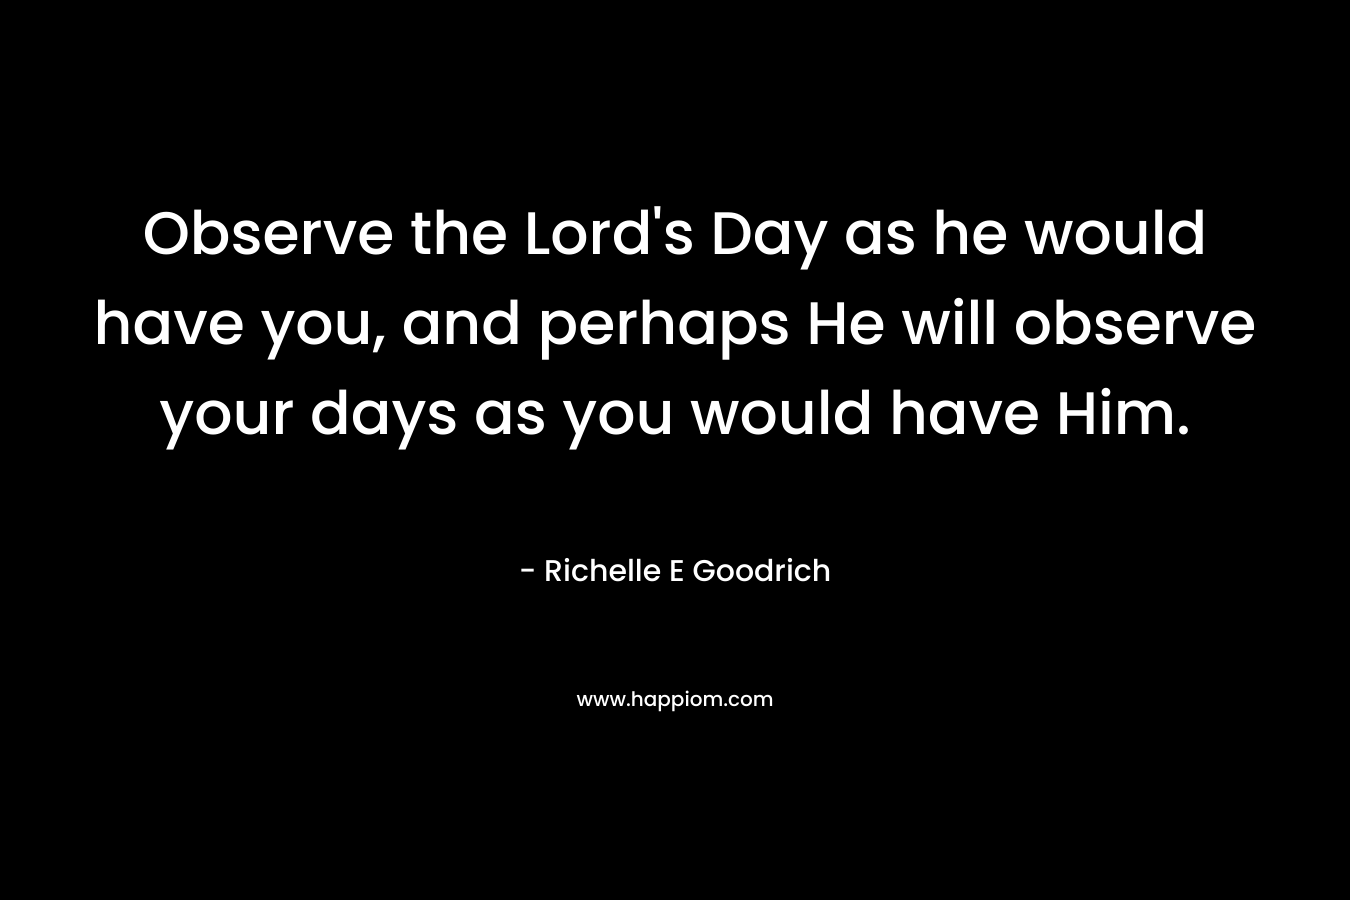 Observe the Lord's Day as he would have you, and perhaps He will observe your days as you would have Him.